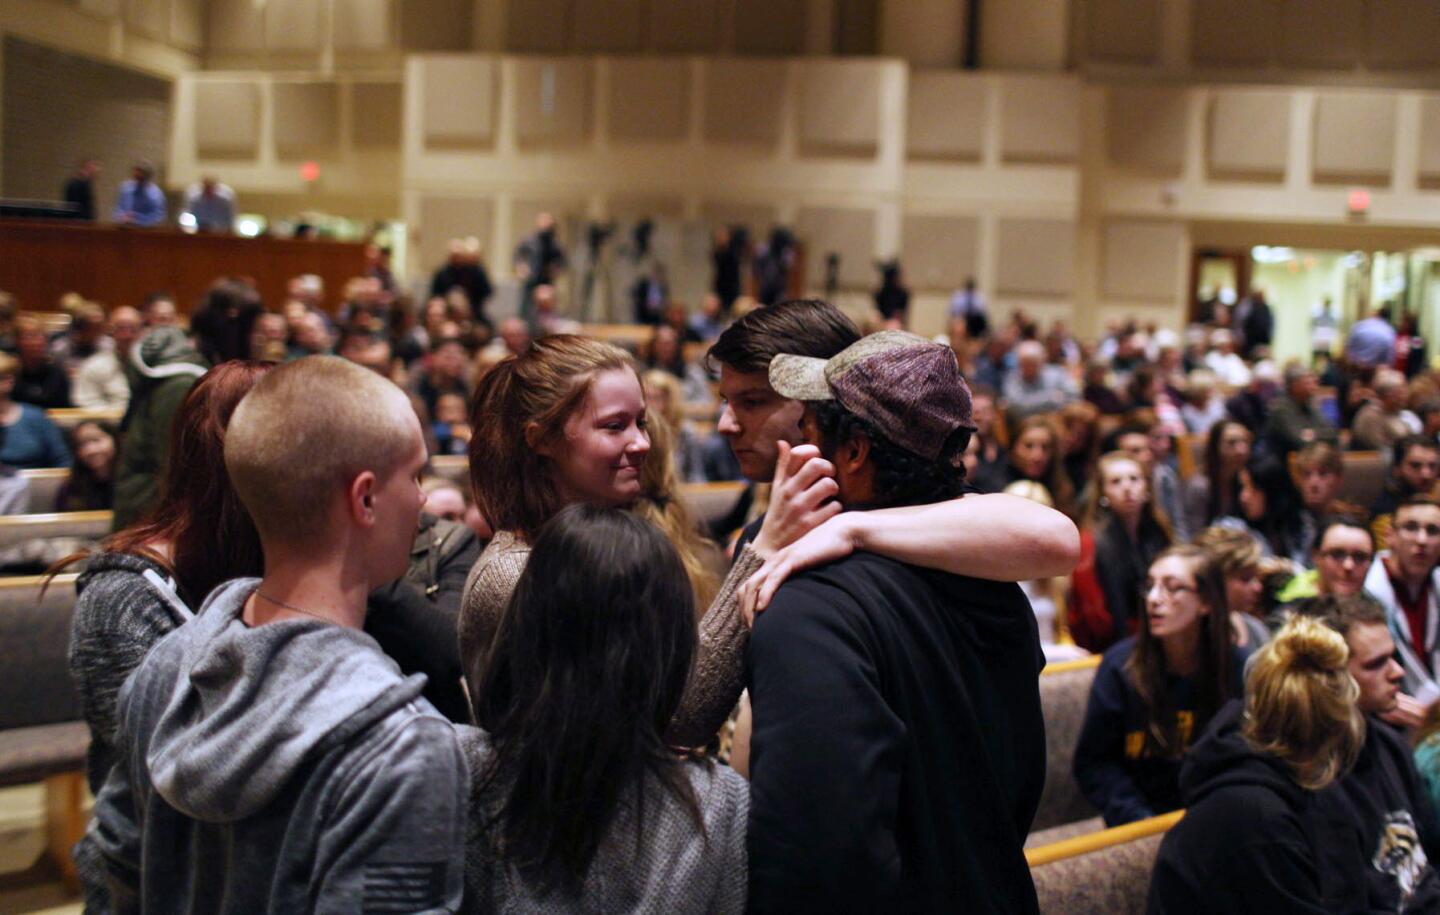 Members of the community pray before the start of the Kalamazoo Community Prayer Service at Centerpoint Church on in Kalamazoo, Mich., Sunday, Feb 21, 2016.